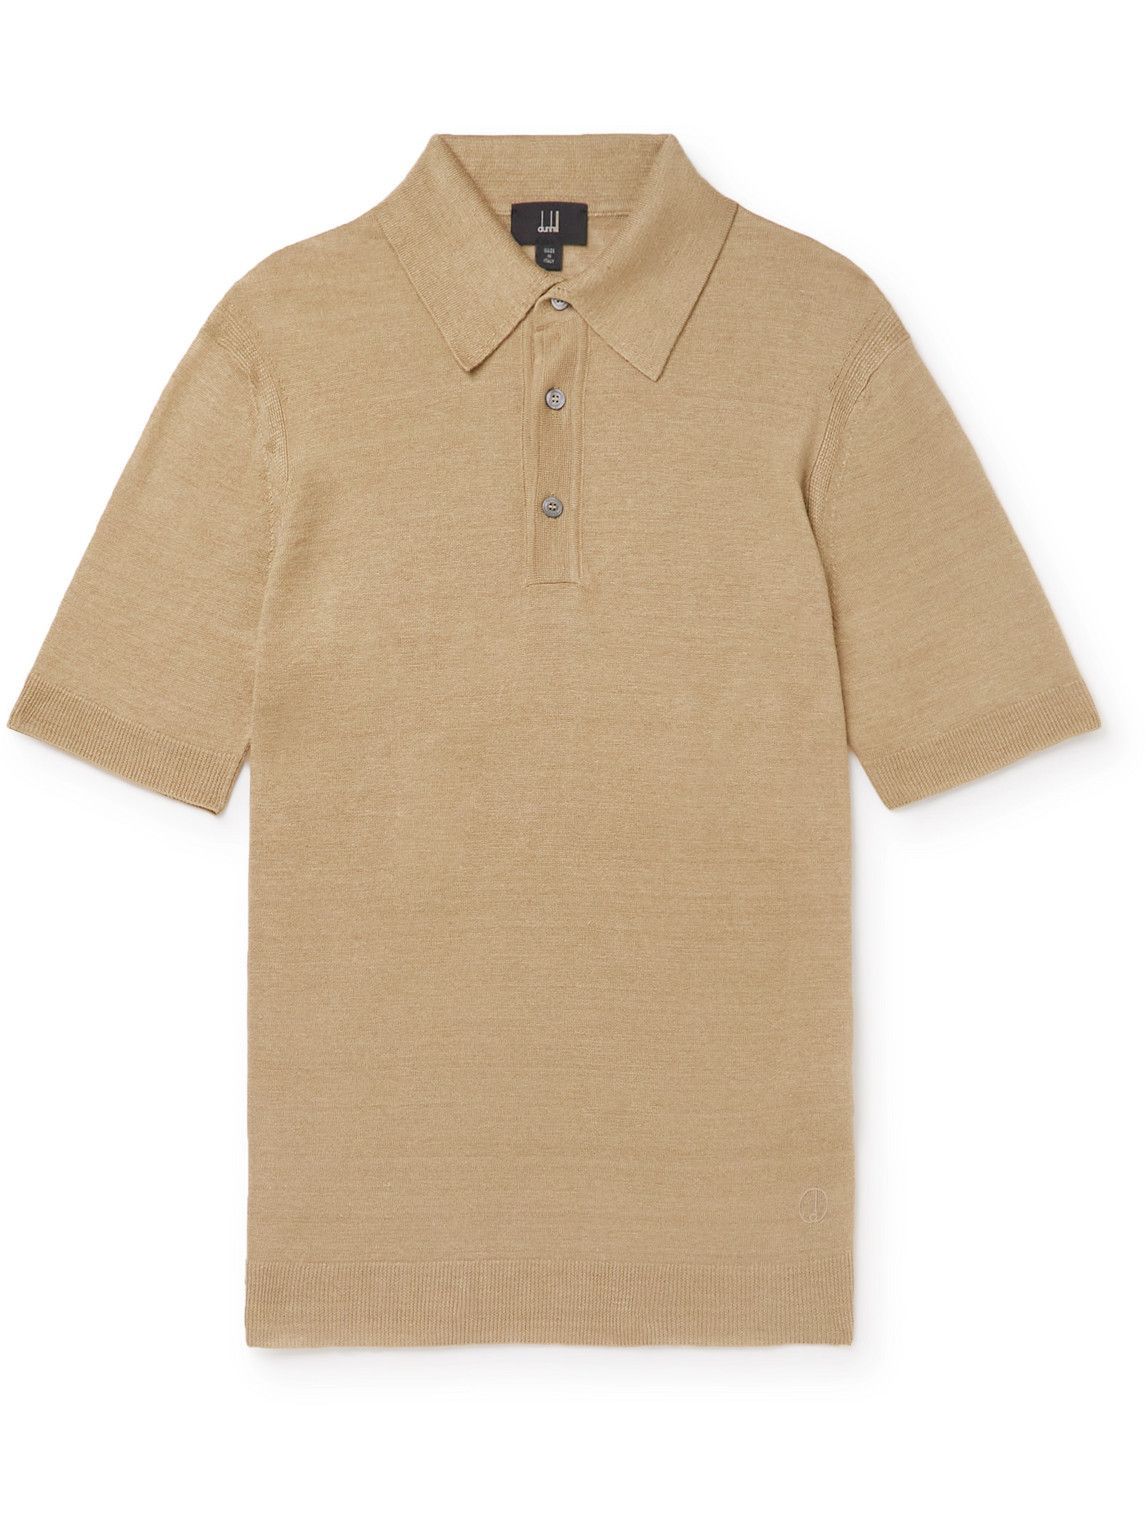 Dunhill - Slim-Fit Linen Polo Shirt - Brown Dunhill